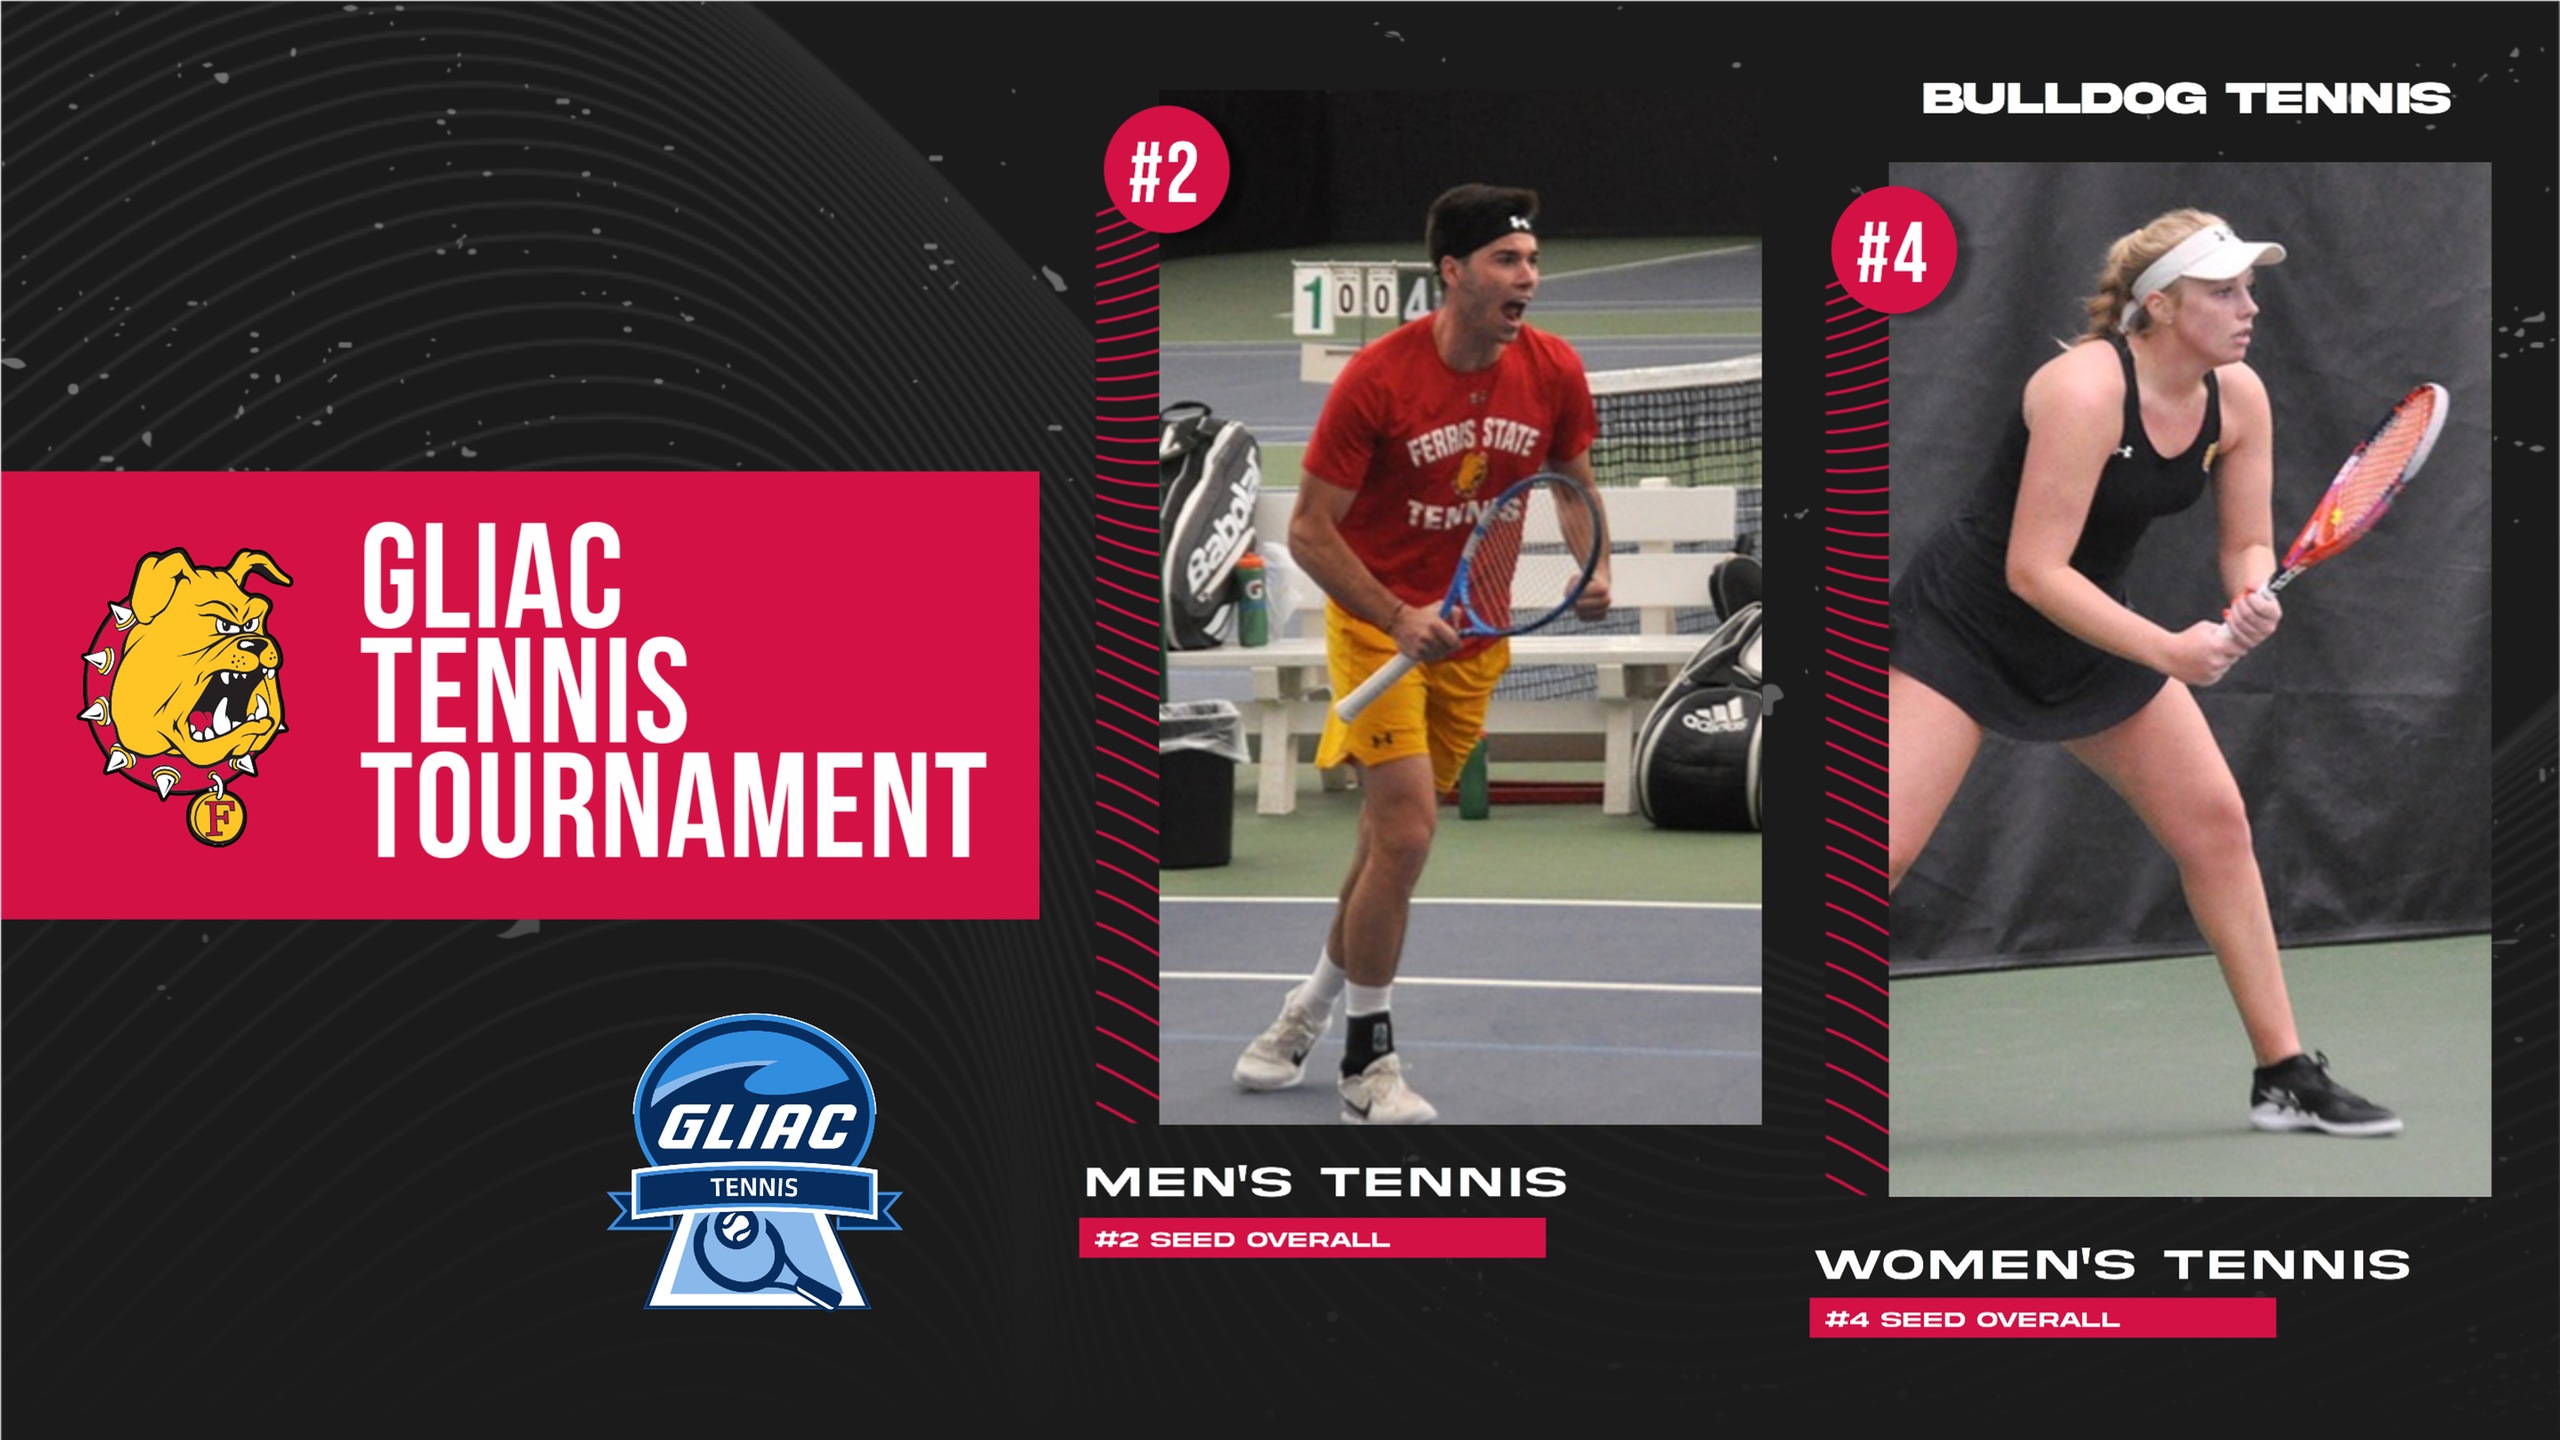 Ferris State Tennis Squads Head To GLIAC Tournament This Weekend Looking To Defend Titles